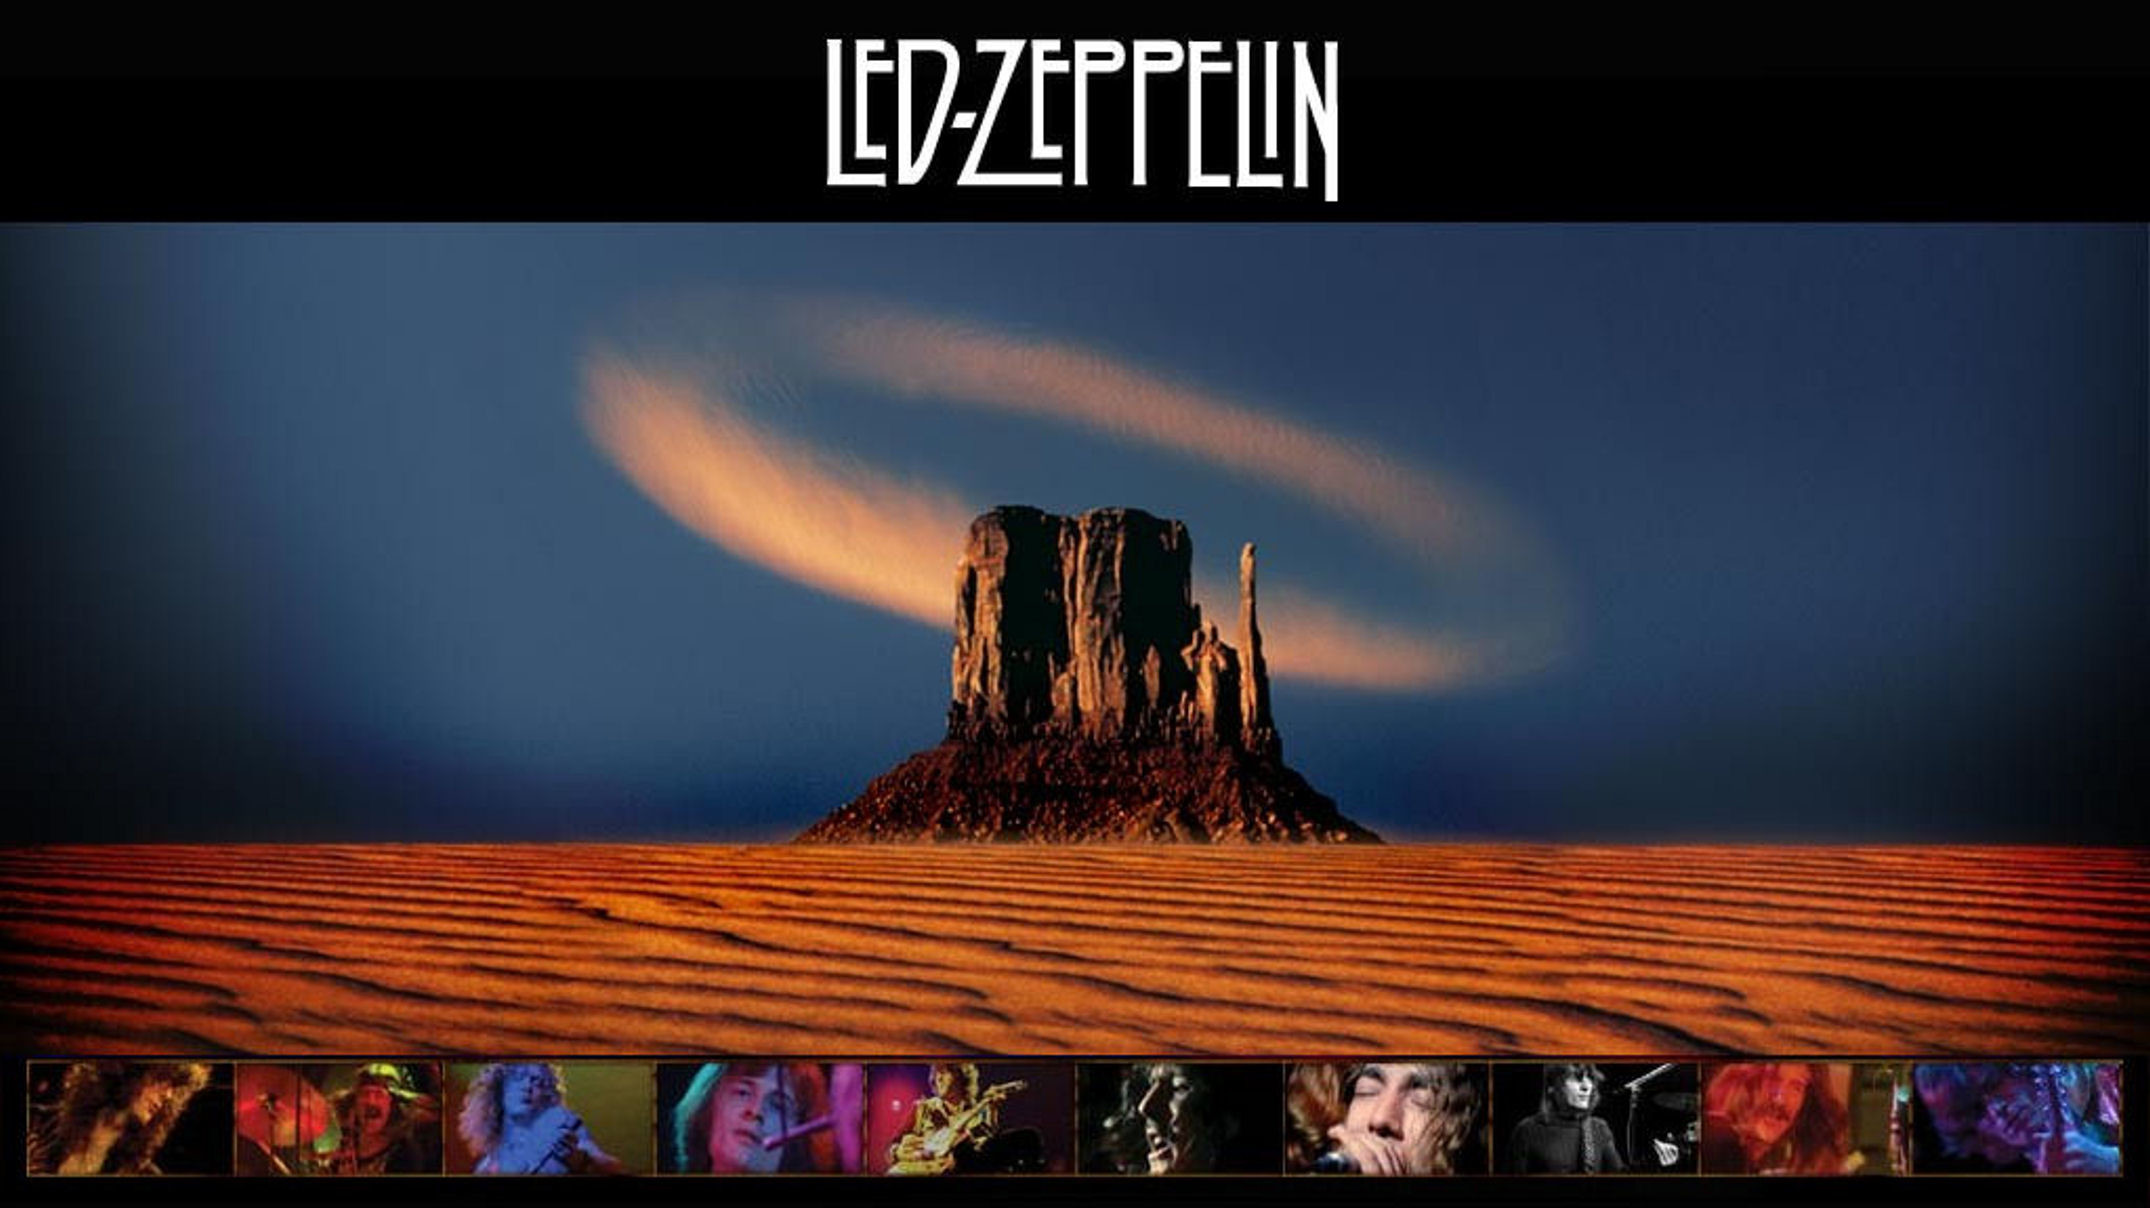 amazing led zeppelin wallpaper 2560x1440 for android tablet  Led zeppelin  wallpaper Led zeppelin Zeppelin